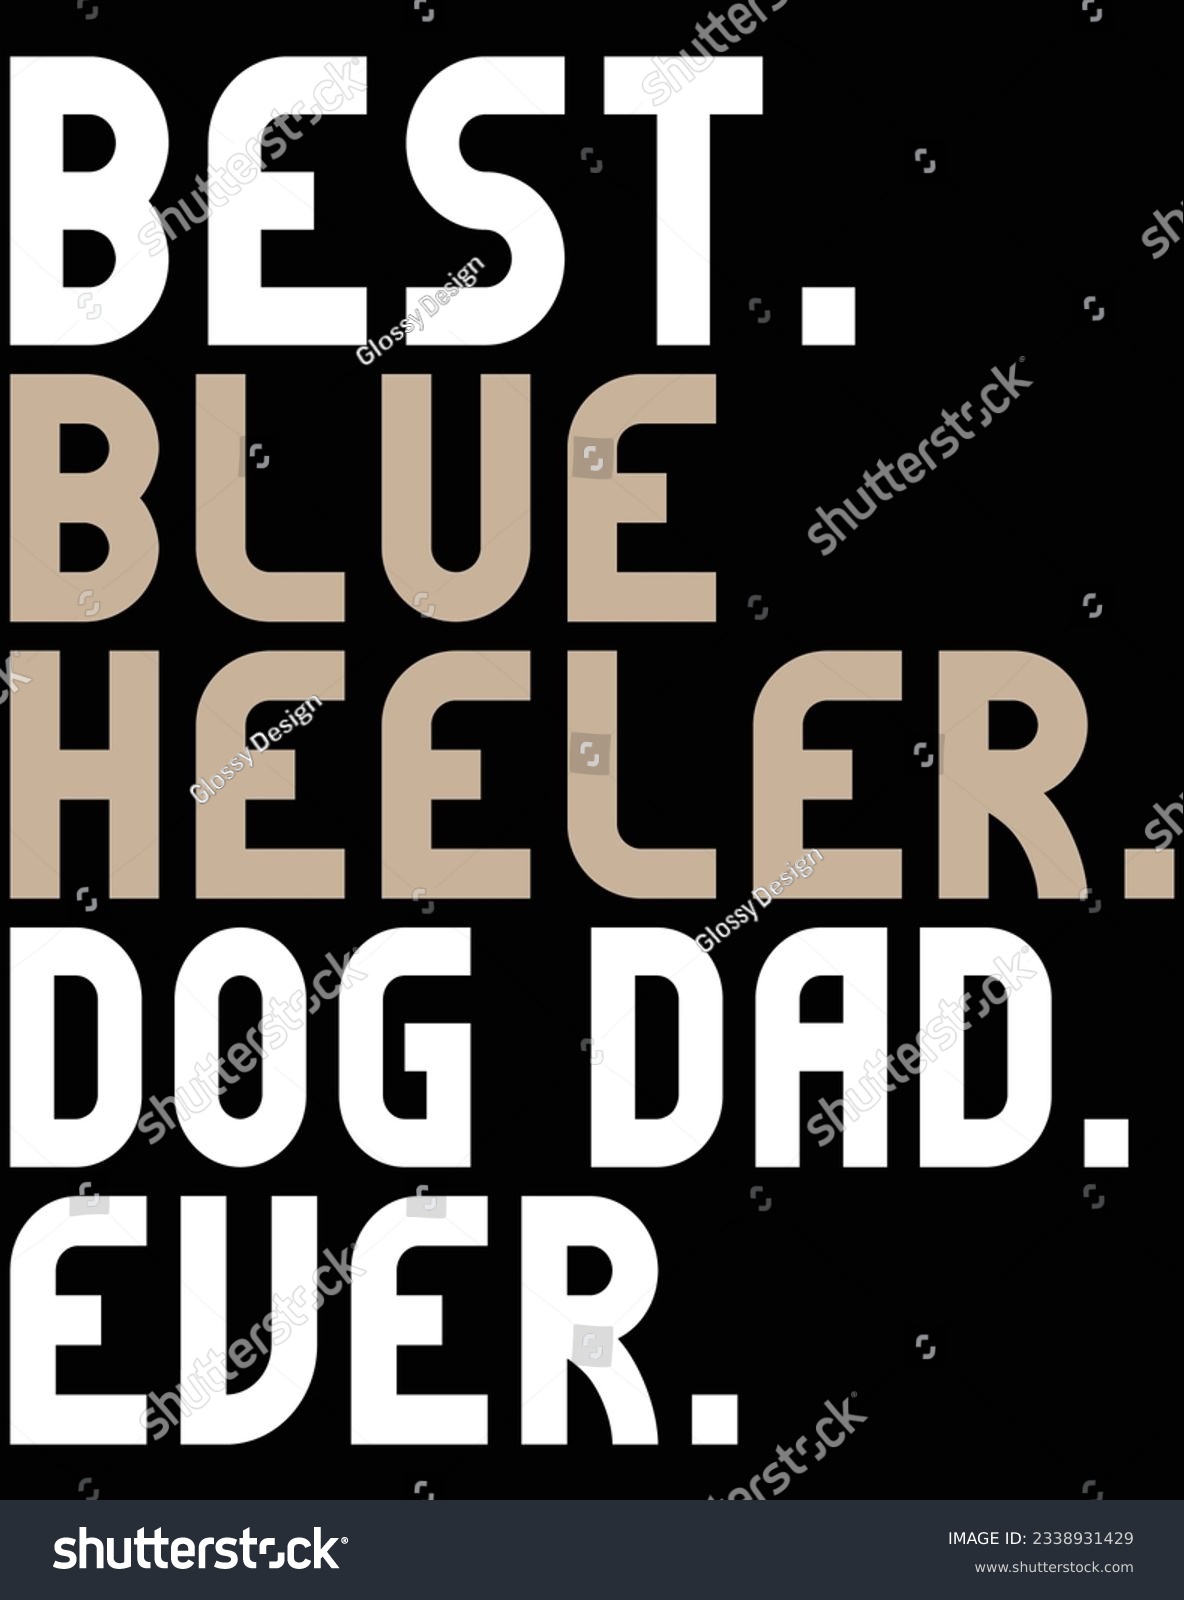 SVG of Best blue heeler dog dad ever EPS file for cutting machine. You can edit and print this vector art with EPS editor. svg